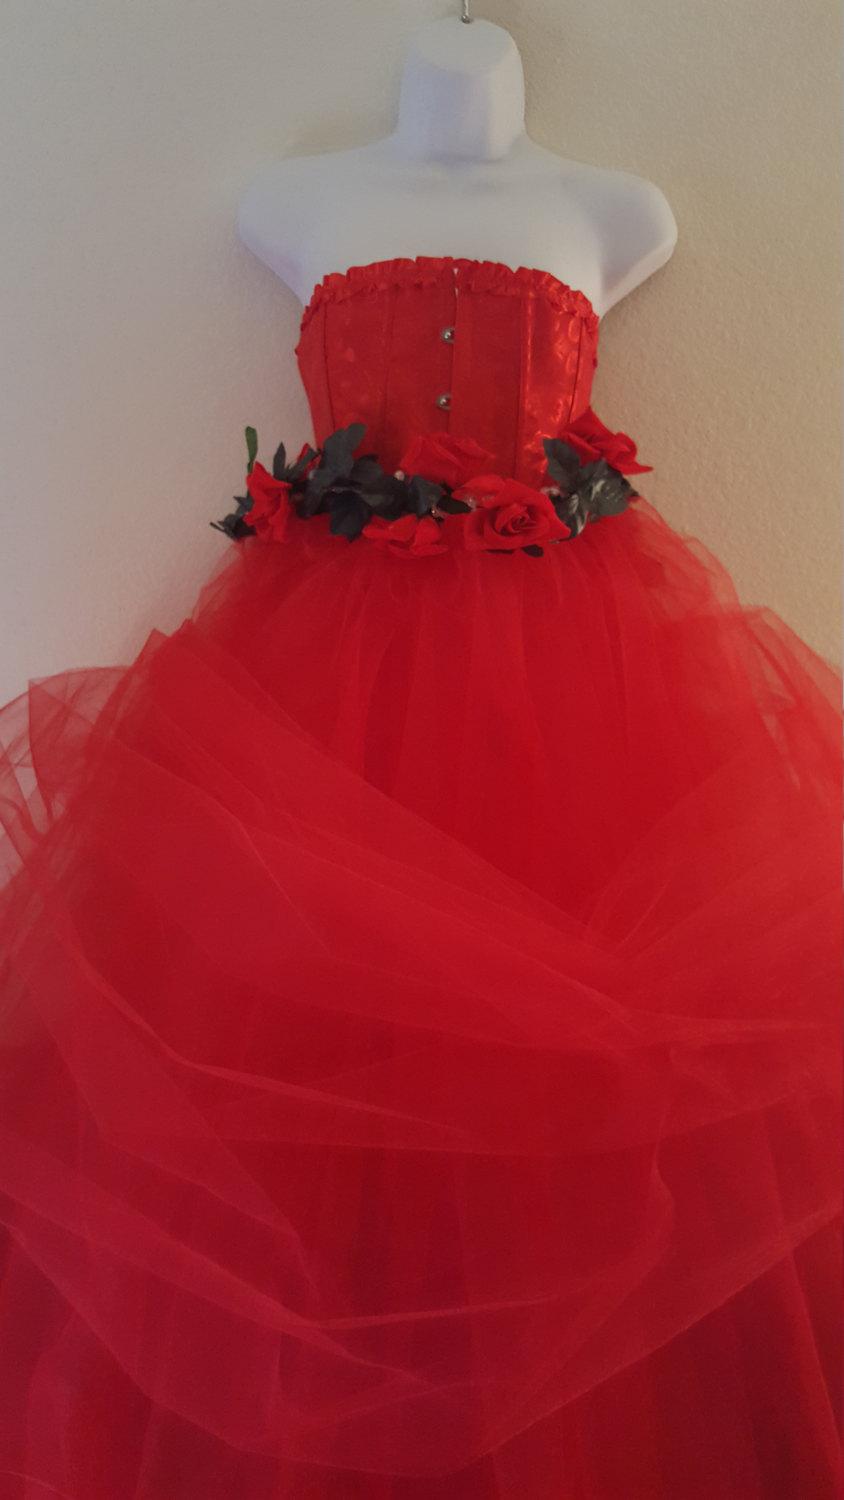 Свадьба - Sample Gown Listing / Valentine Rose Goddess Romantic Red Corset Tulle Ball Gown Dress Bridal Wedding Gown Party Costume